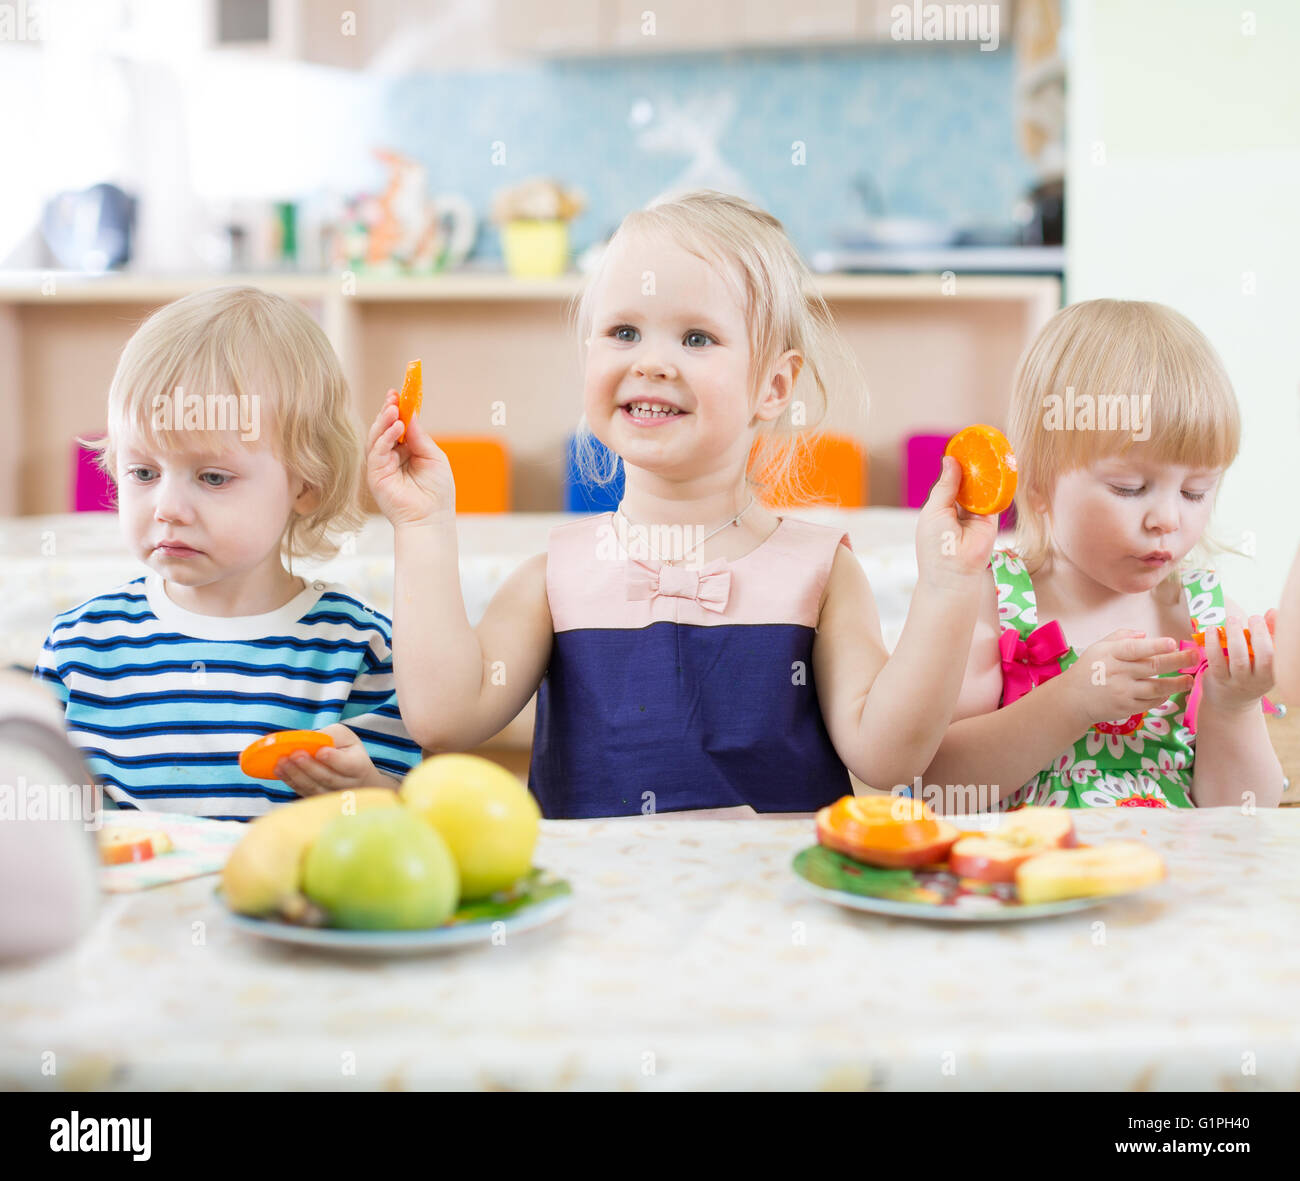 Funny kids eating oranges in day care centre Stock Photo